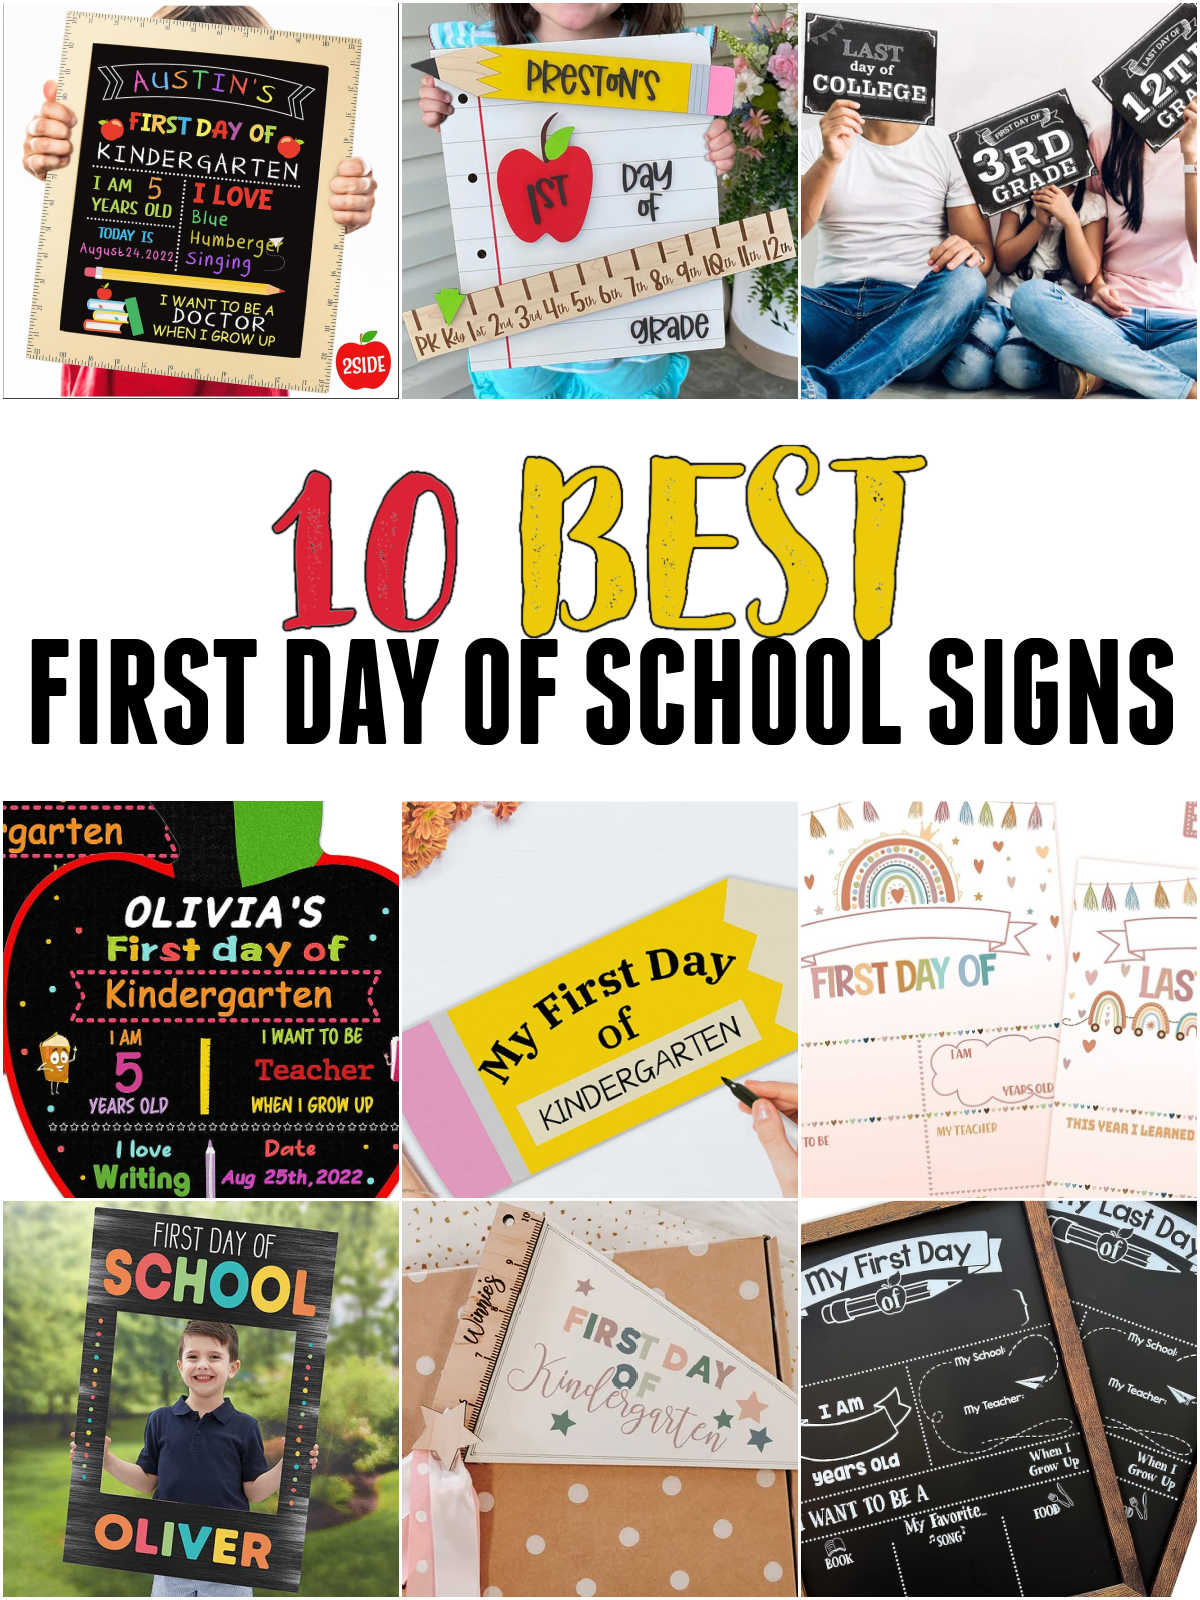 Collage of the best first day of school signs